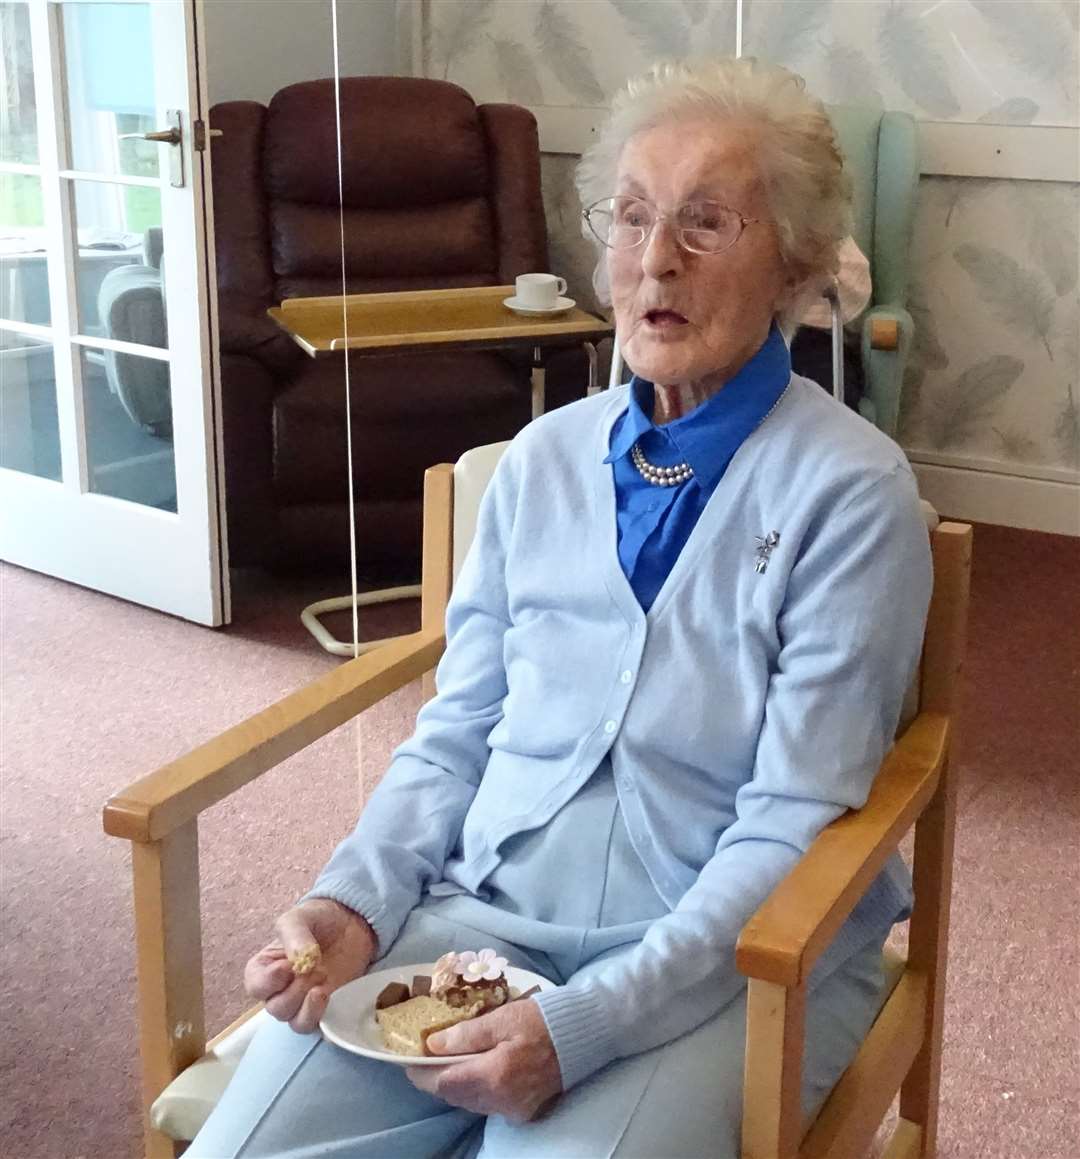 Agnes Williams, who has died aged 105, was renowned for her warm presence at the Isobel Fraser Care Home in Inverness.